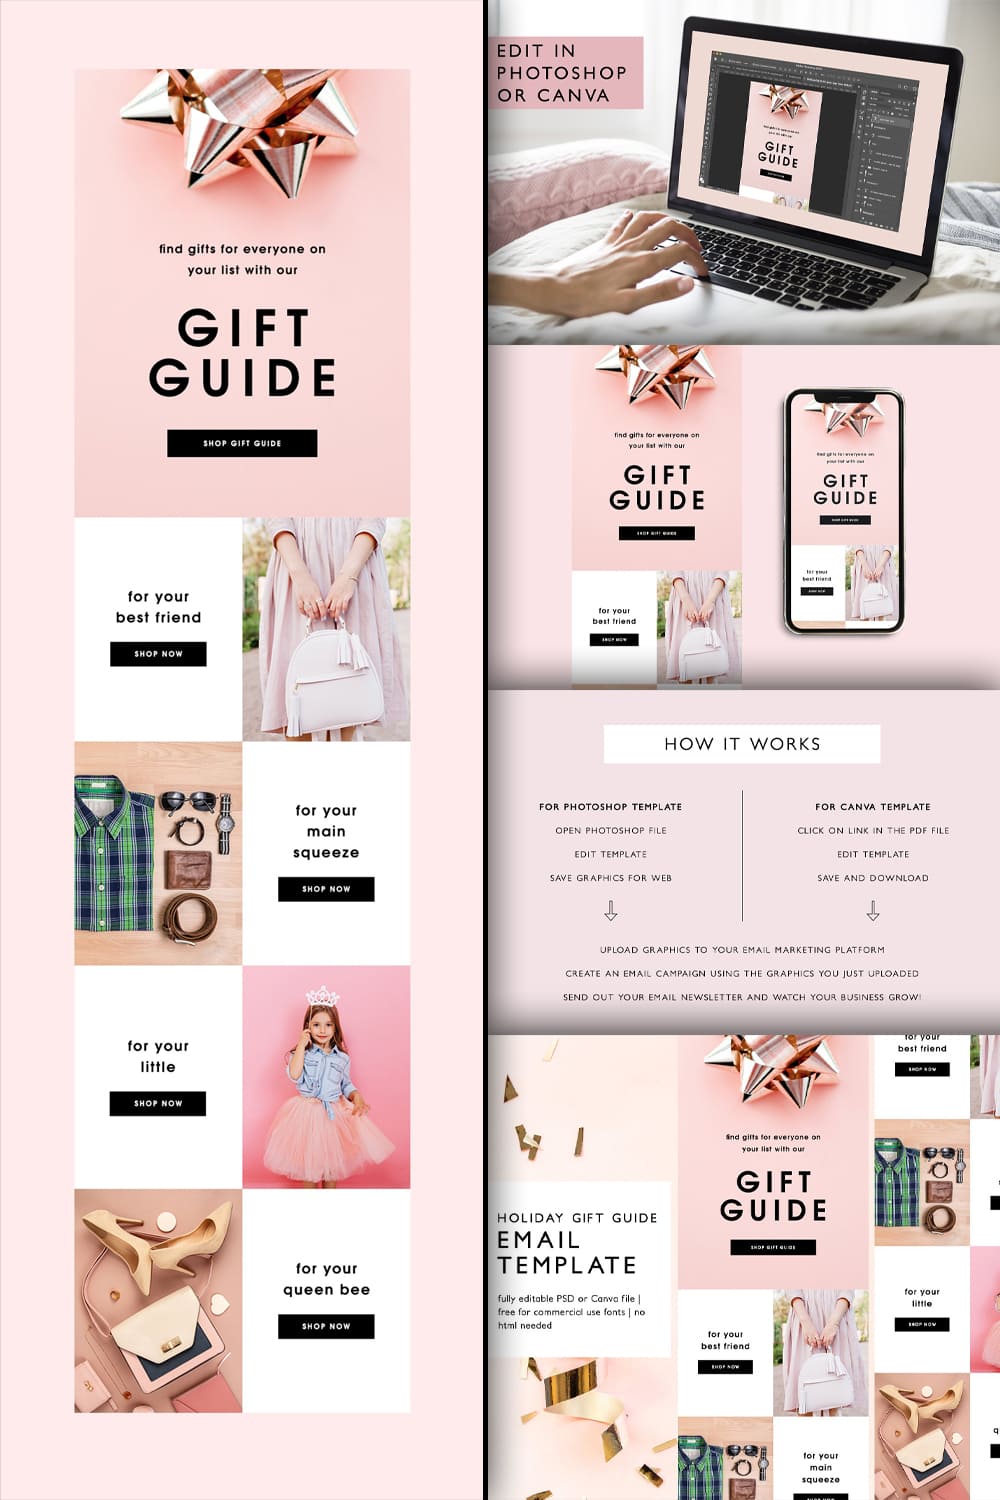 Holiday Gift Guide Email Template - Pinterest.